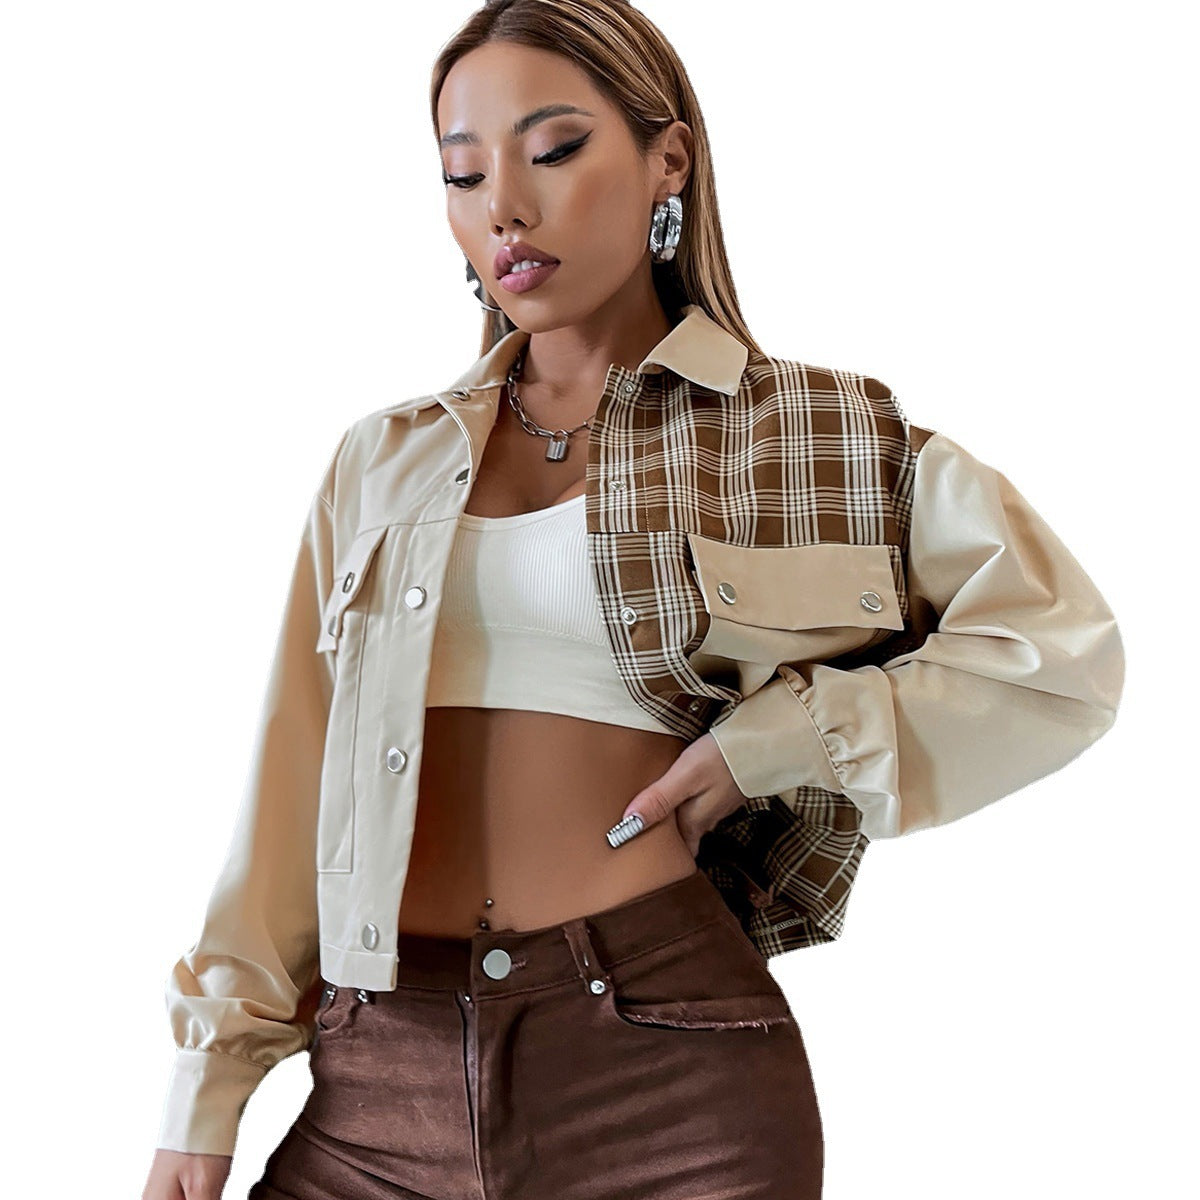 Women's Loose-fitting Button-down Jacket